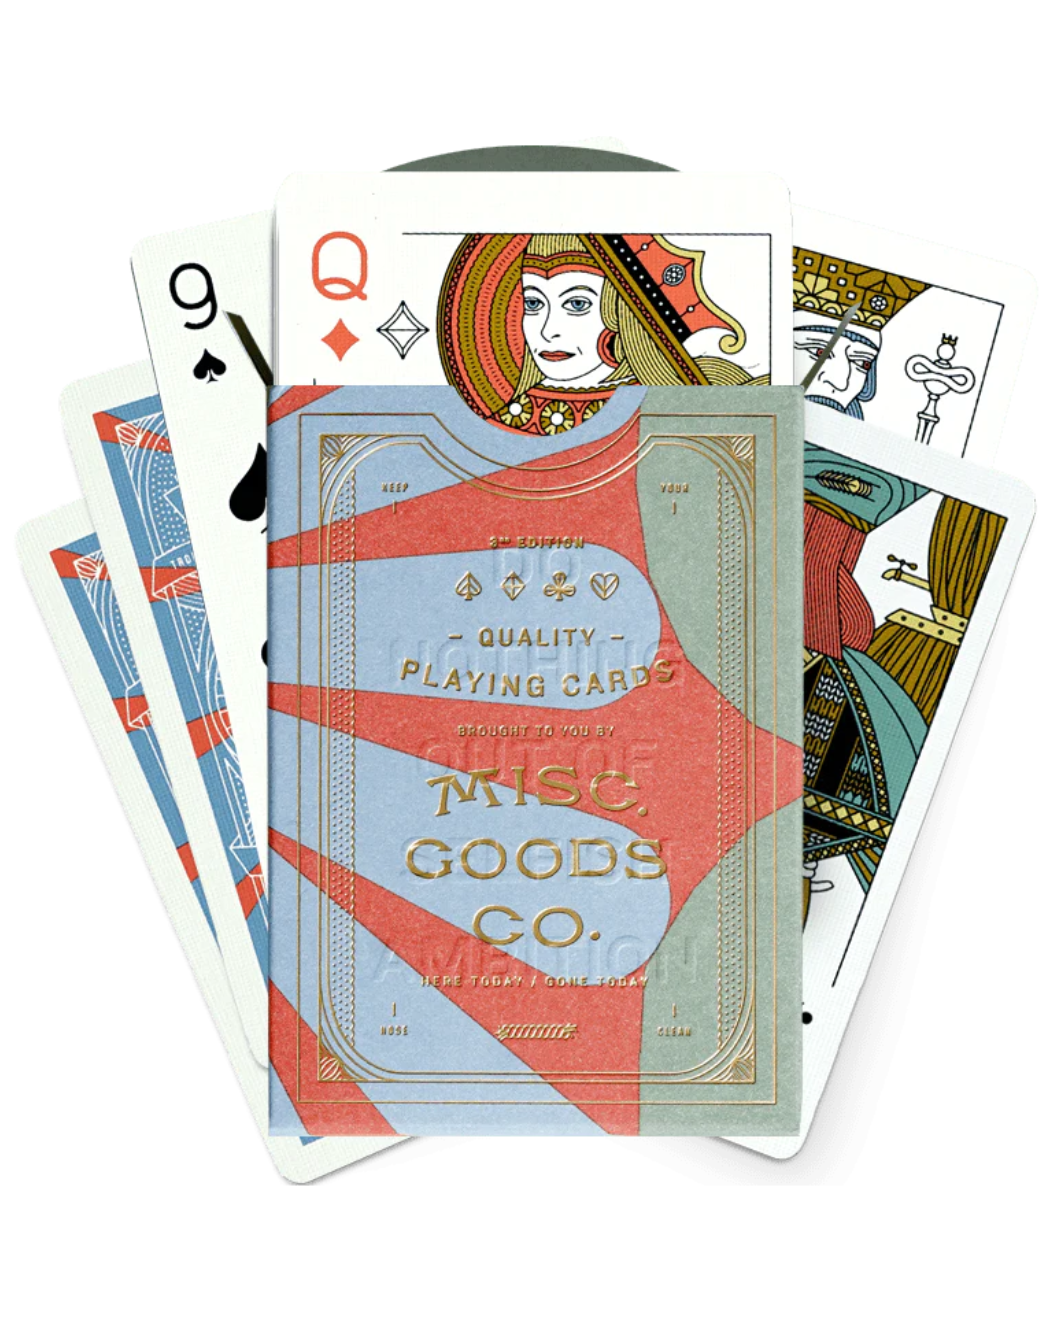 MISC Goods | Playing Cards | Special Edition Ltd.